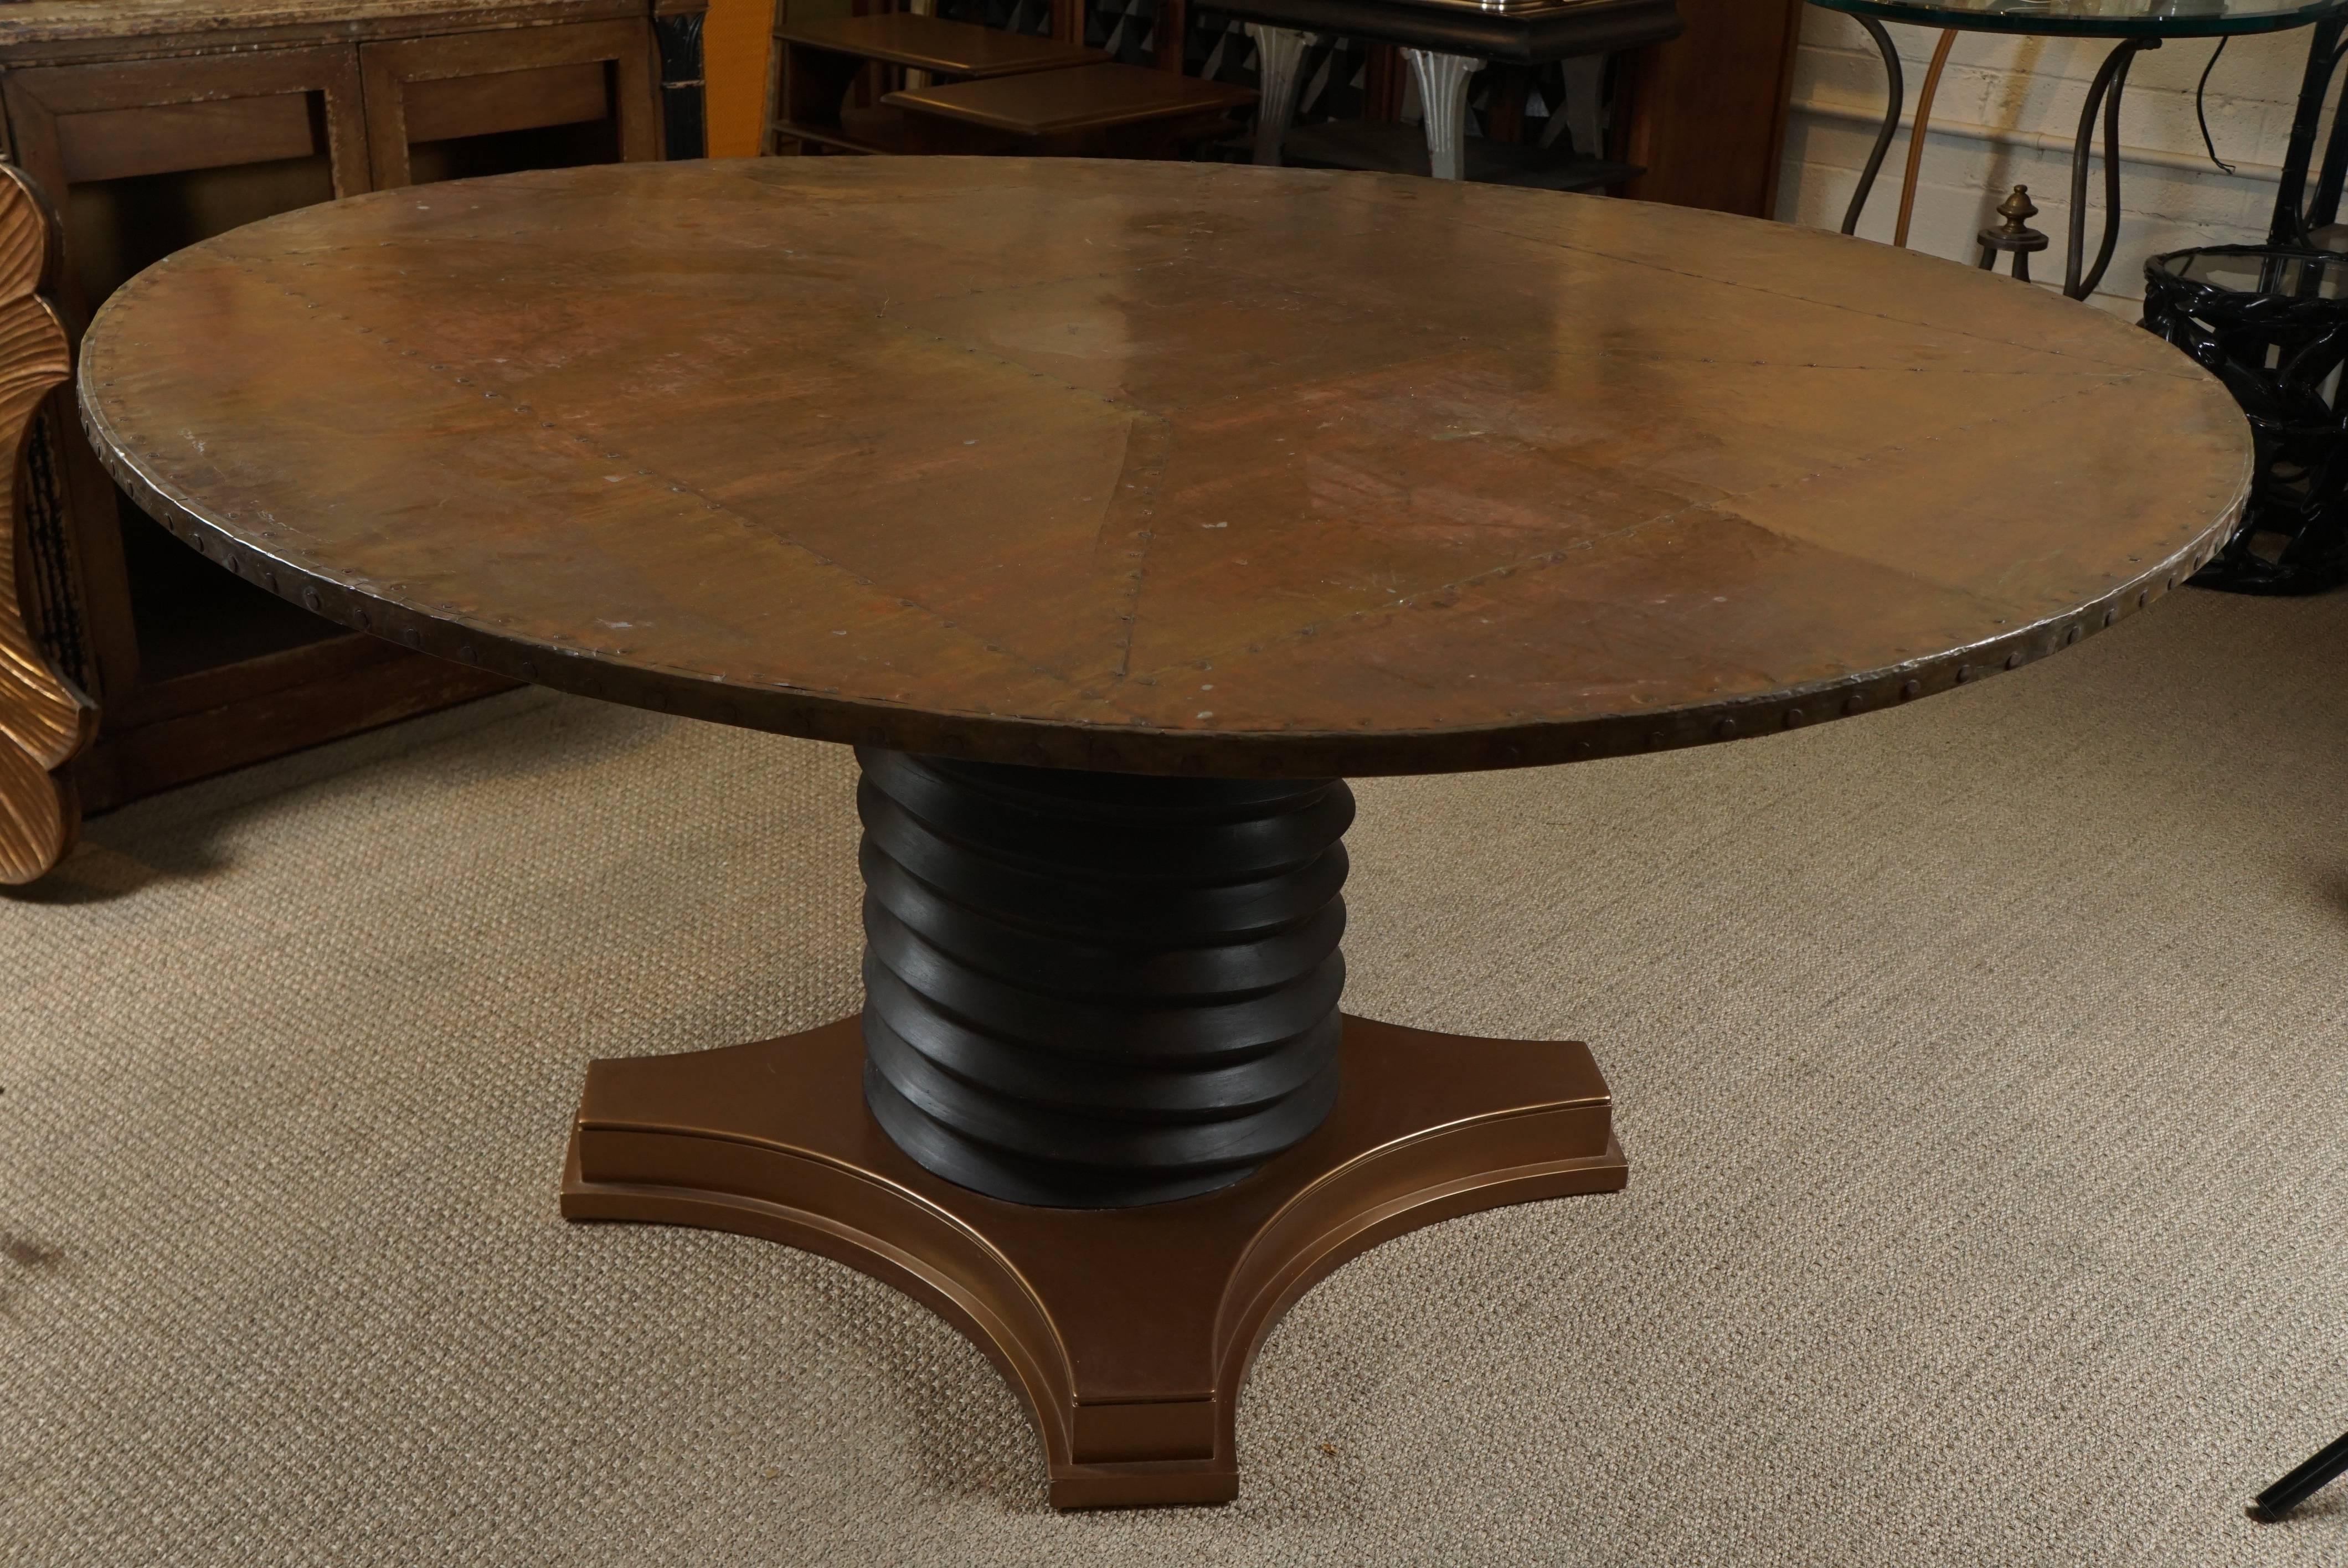 Here is a great round dining table with a copper top with hammered nail detail. The pedestal base has a spiral motif in a graphite black lacquered finish that rests on a painted metallic copper base. The table has a Brutalist style with a